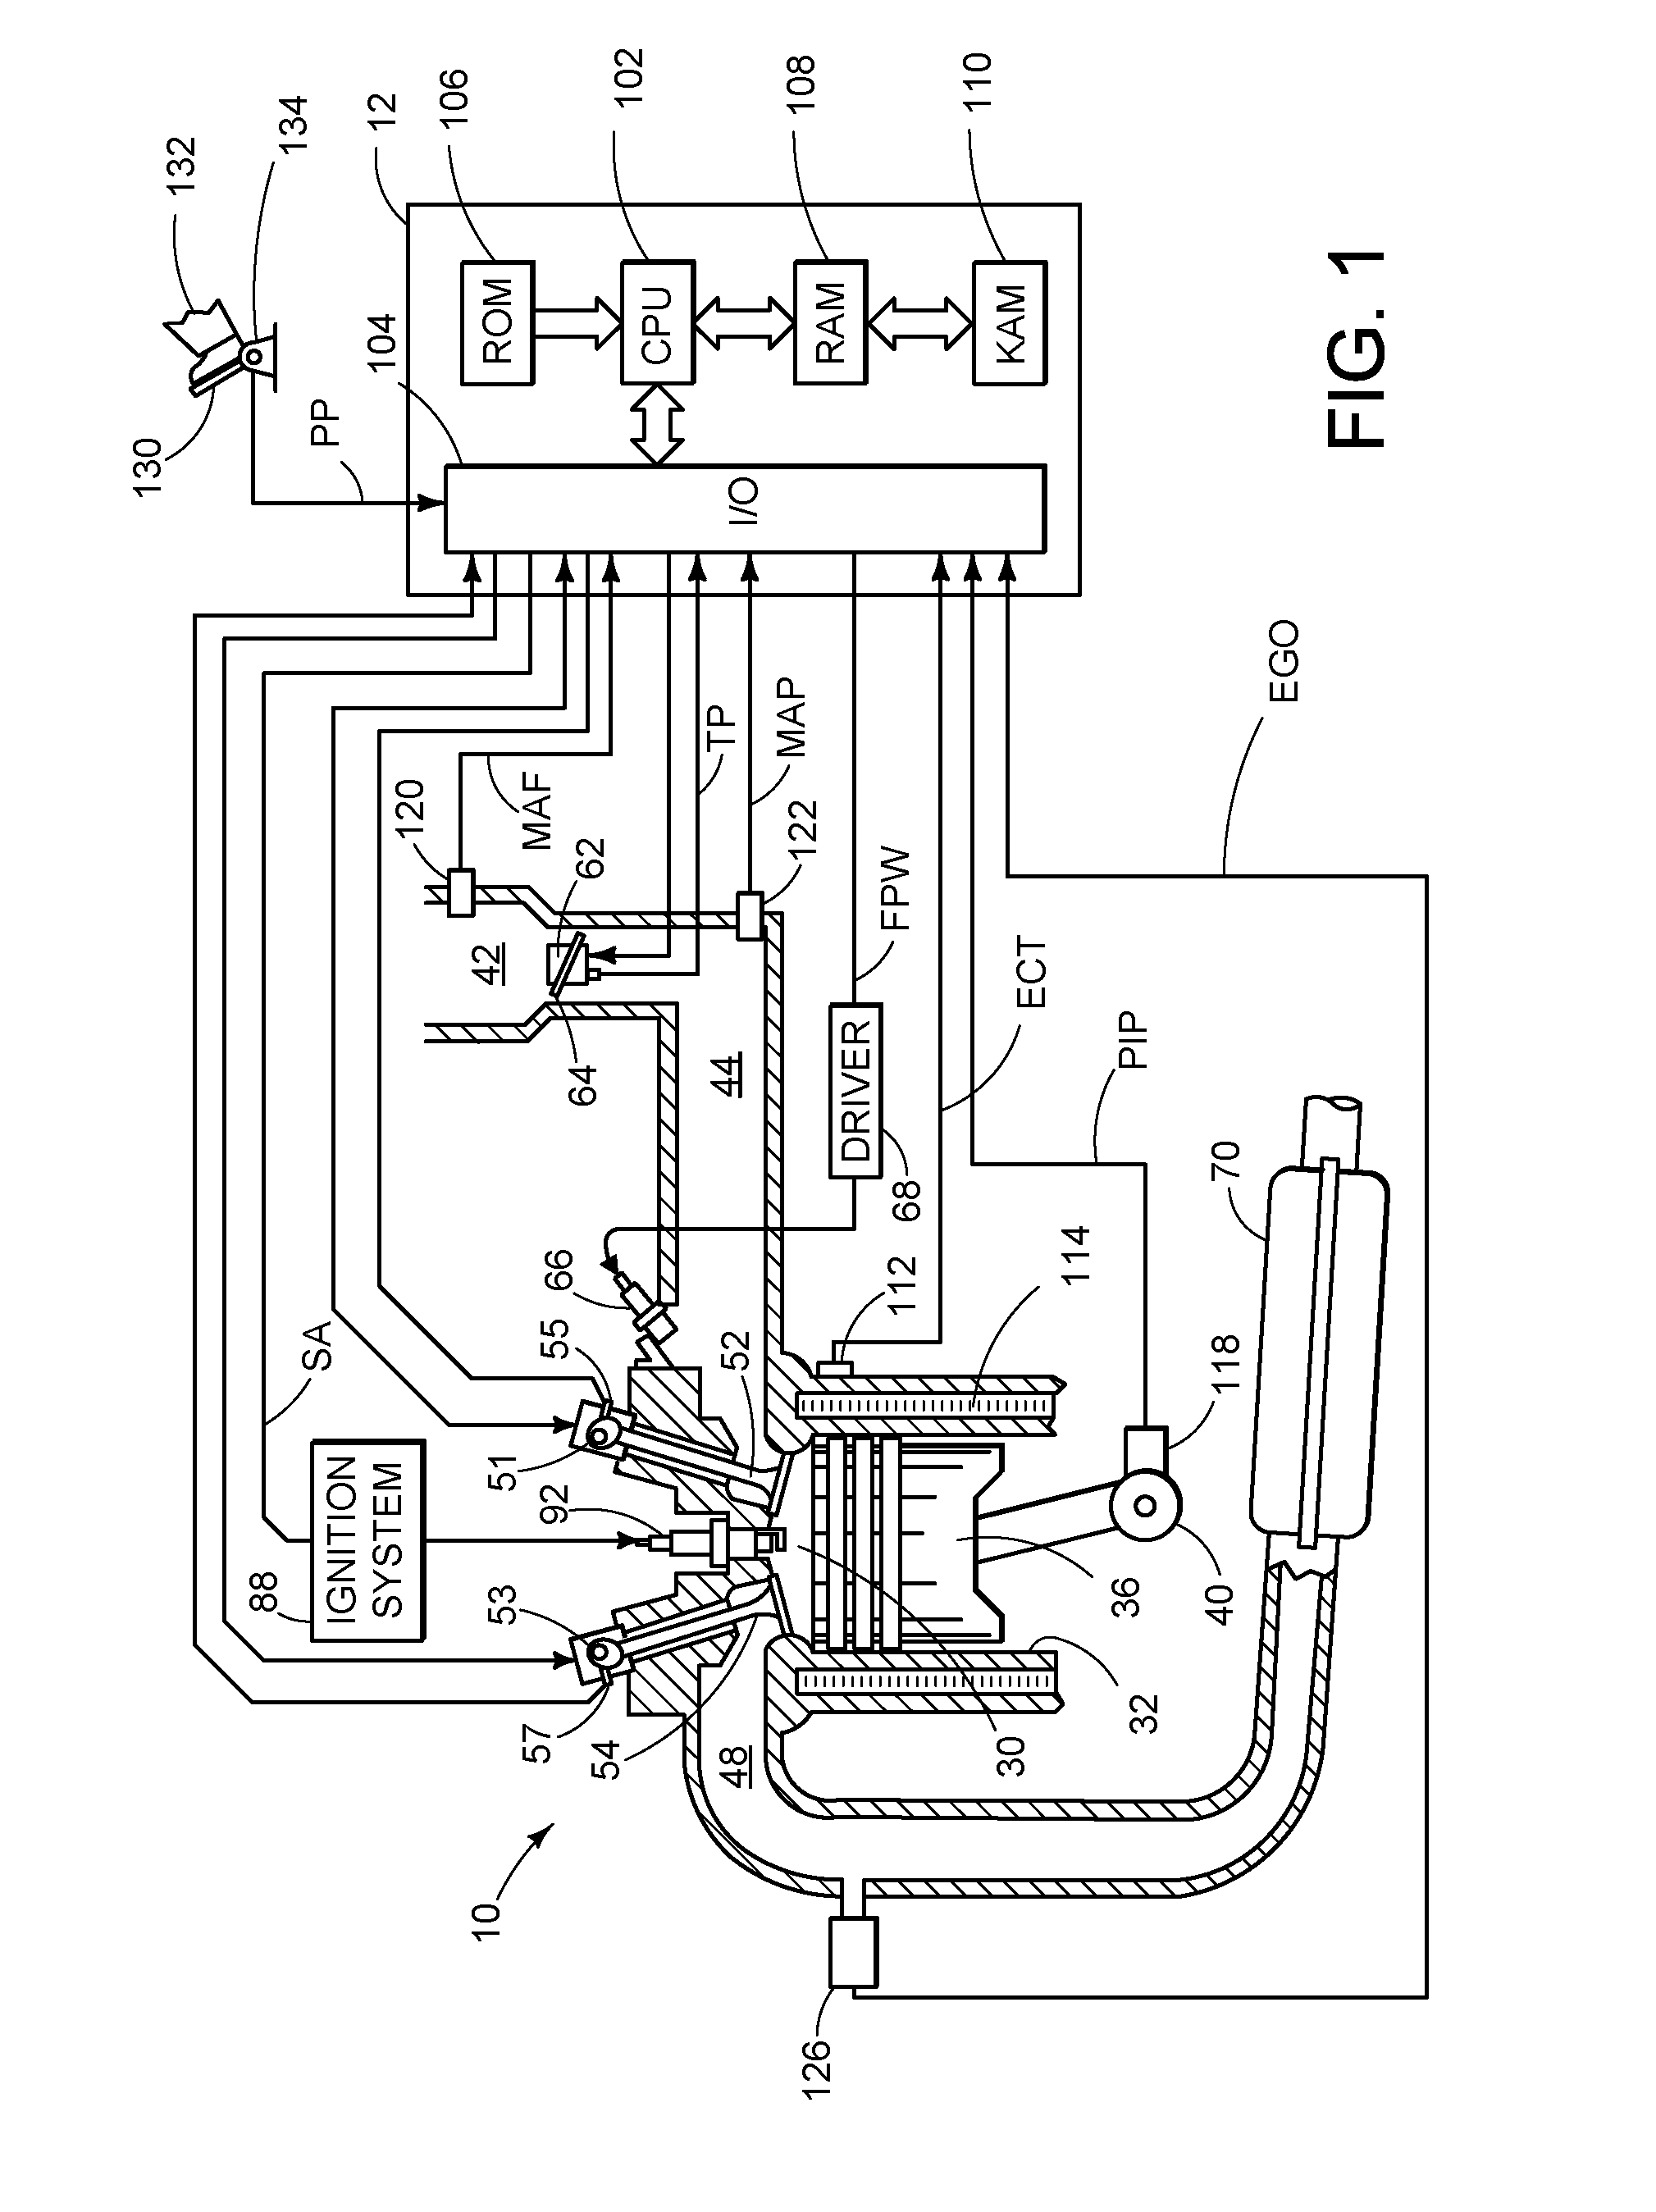 Integrated Gaseous Fuel Delivery System